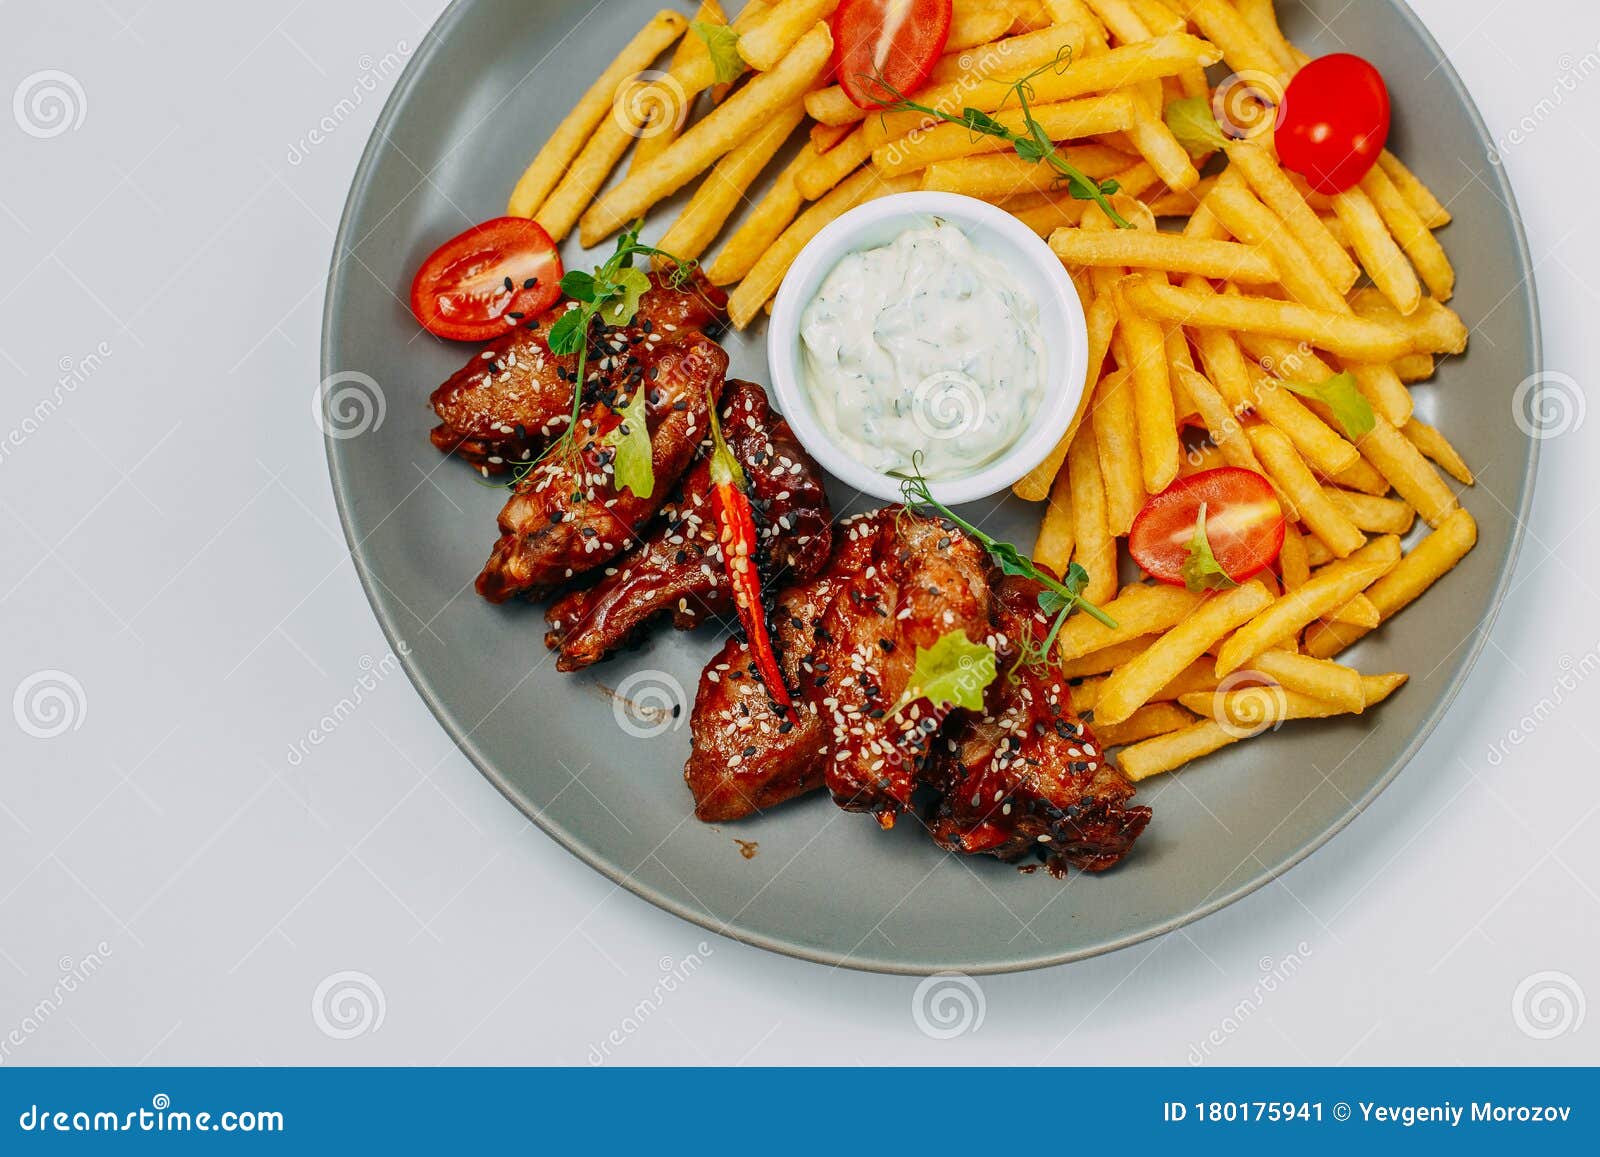 Chicken Wings Photos Download The BEST Free Chicken Wings Stock Photos   HD Images